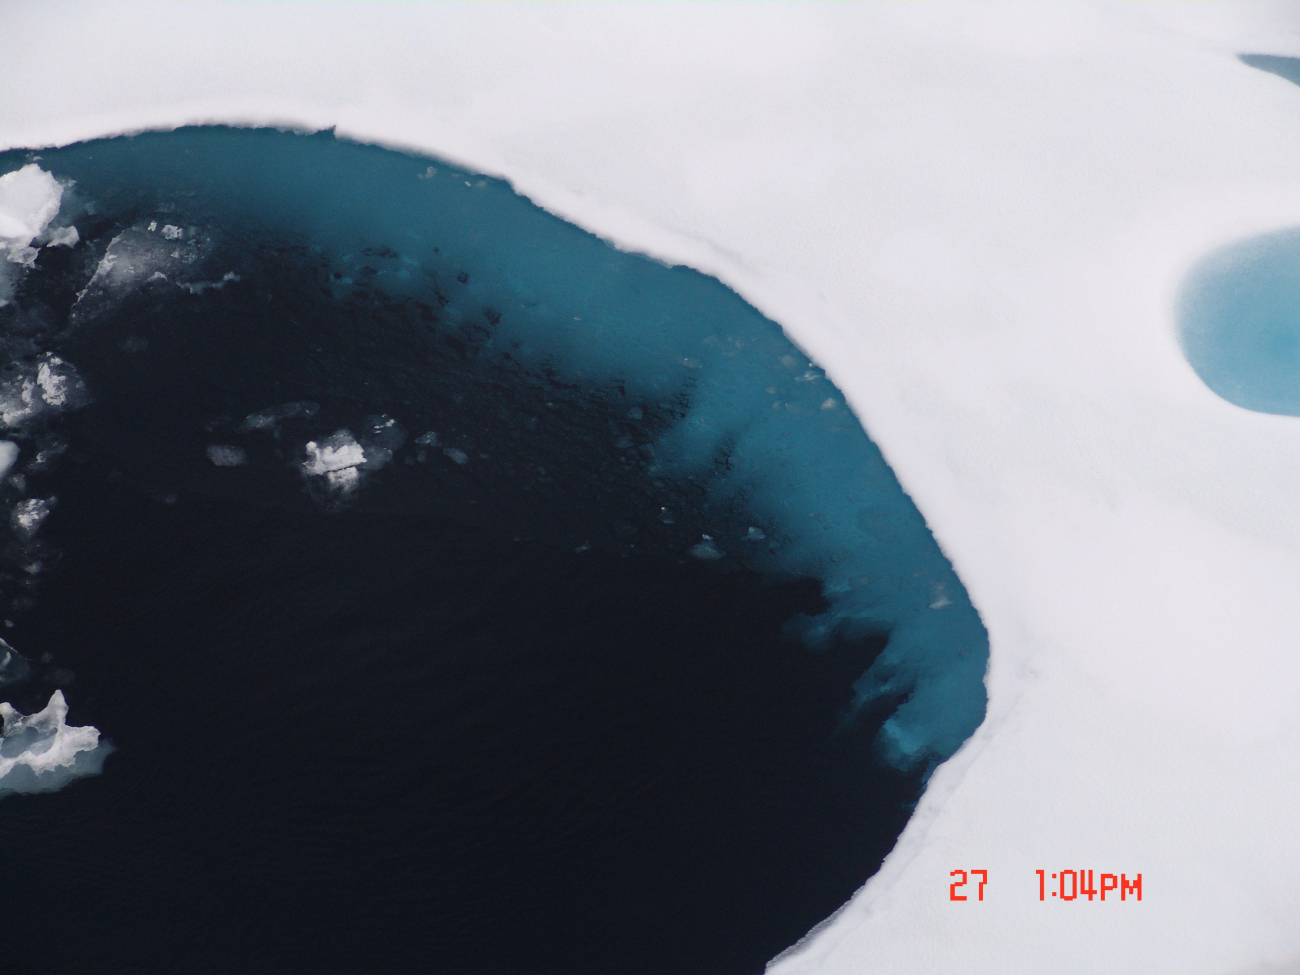 A large melt pool that has been completely melted looking down into theunderlying ocean water